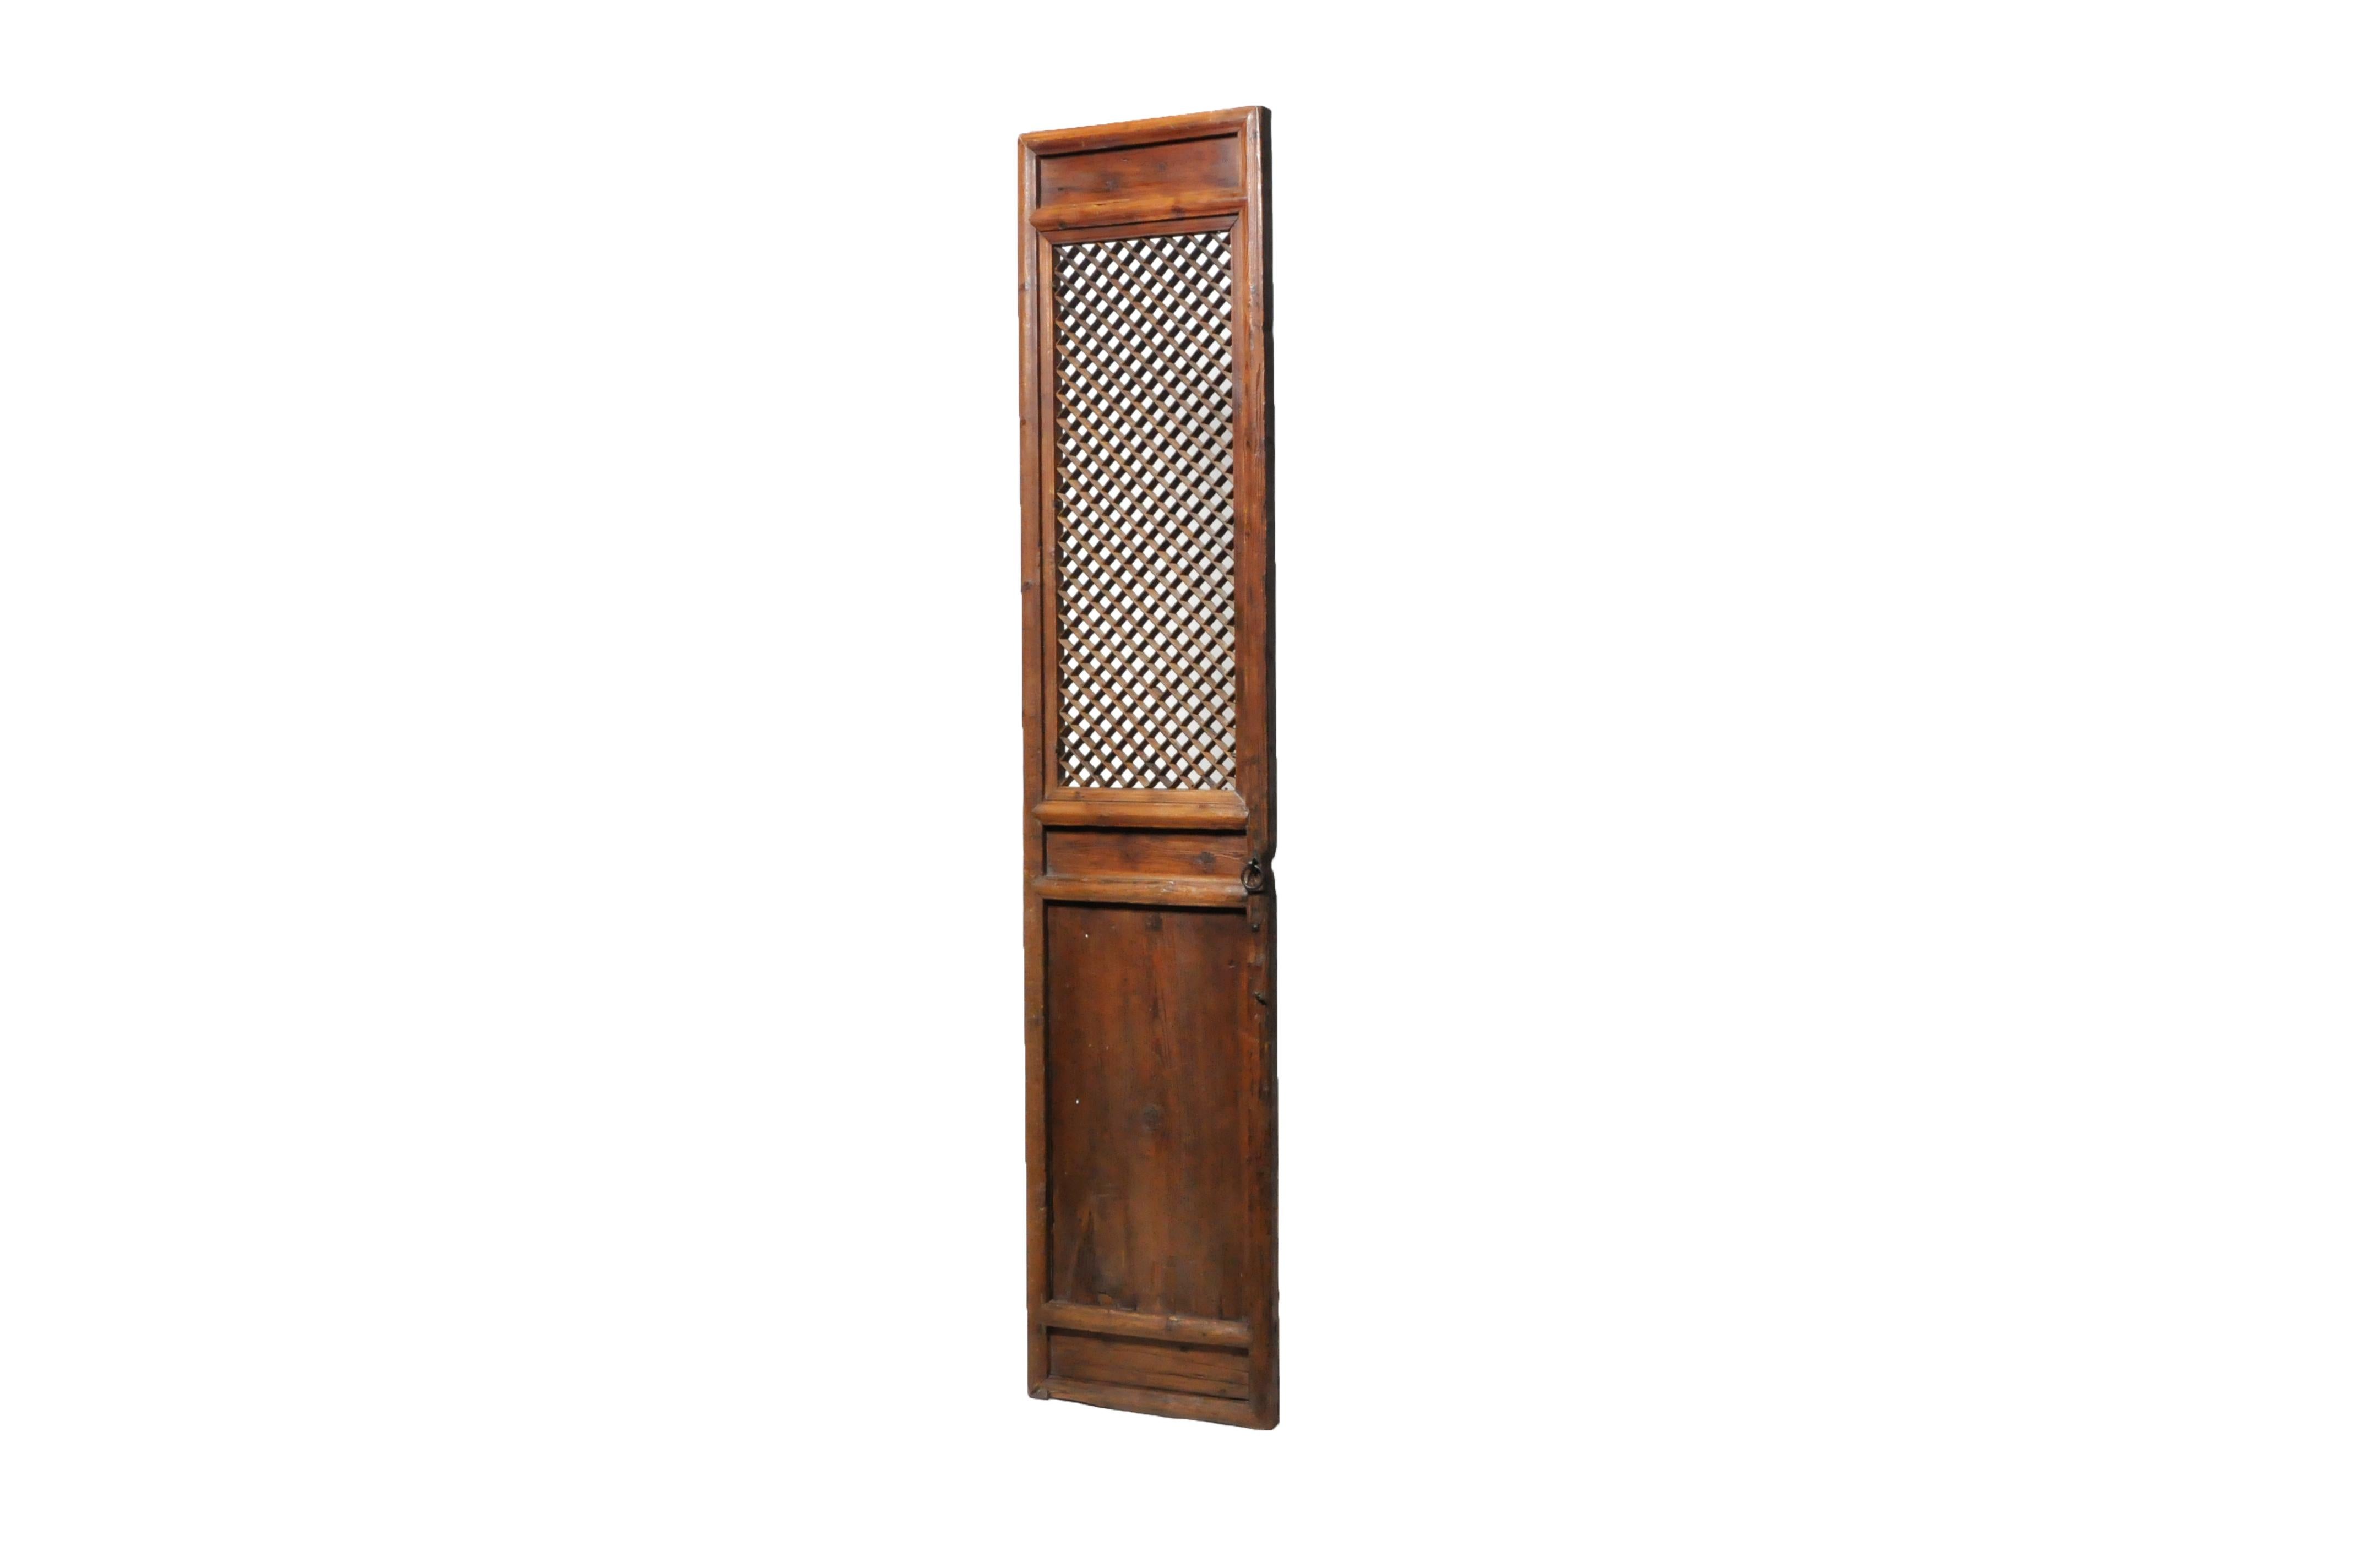 This tall and slender elm wood door panel was once part of a large series that surrounded a private courtyard in a Northern Chinese house. It features fine latticework and carved details. The patina is original with the addition of French polish and